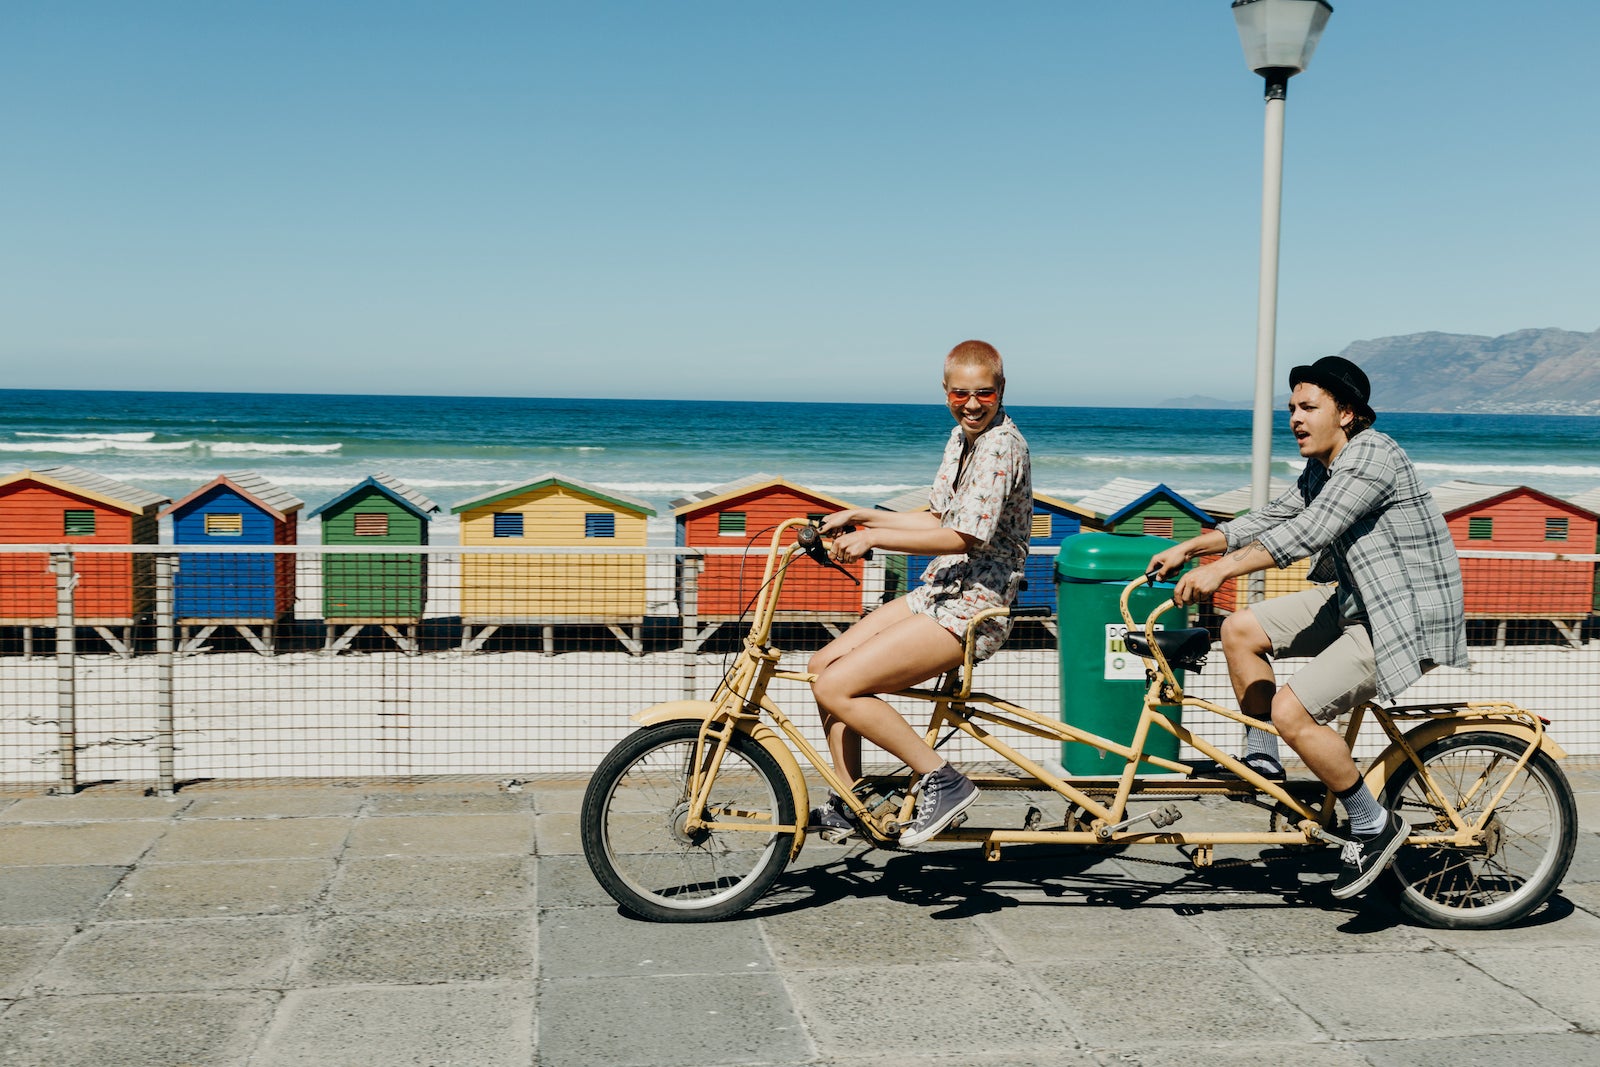 A young couple rides a tandem bicycle